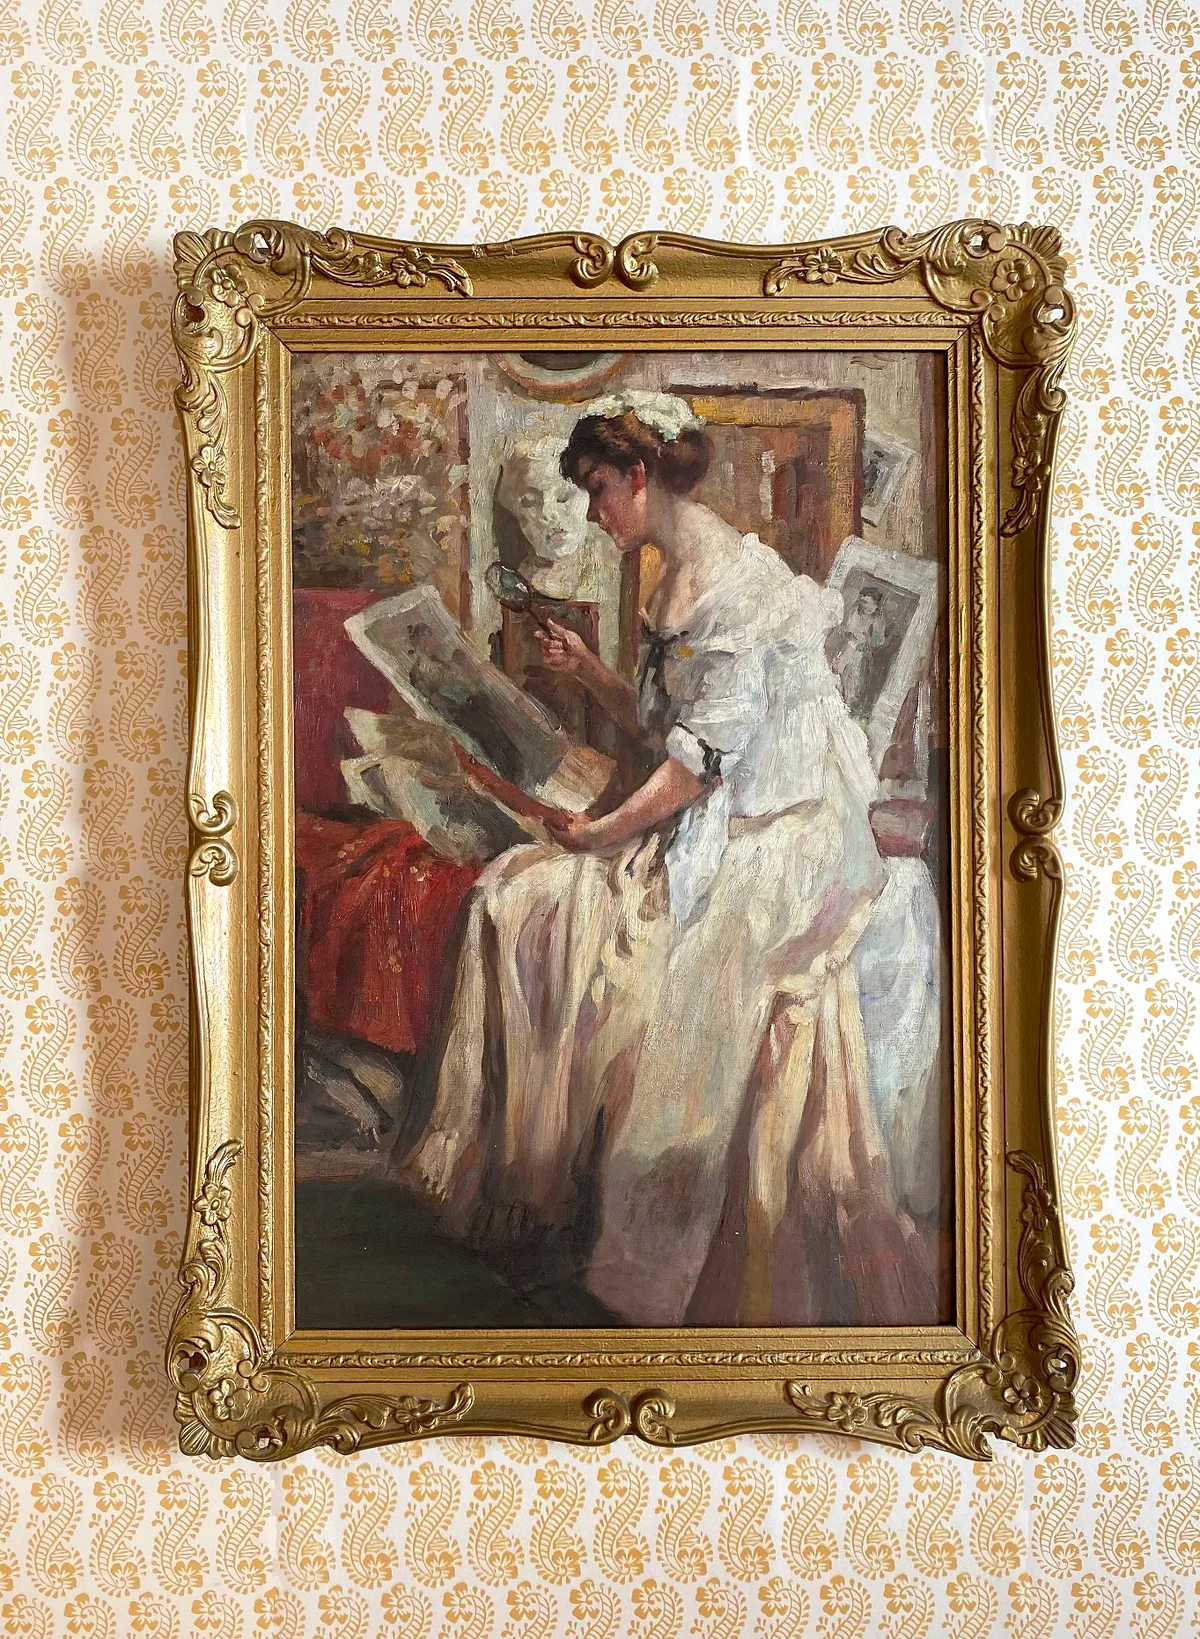 Lot 192, After Fernand Toussaint estimate £100 - £200. Shot against Molly Mahon Lani wallpaper in Gold